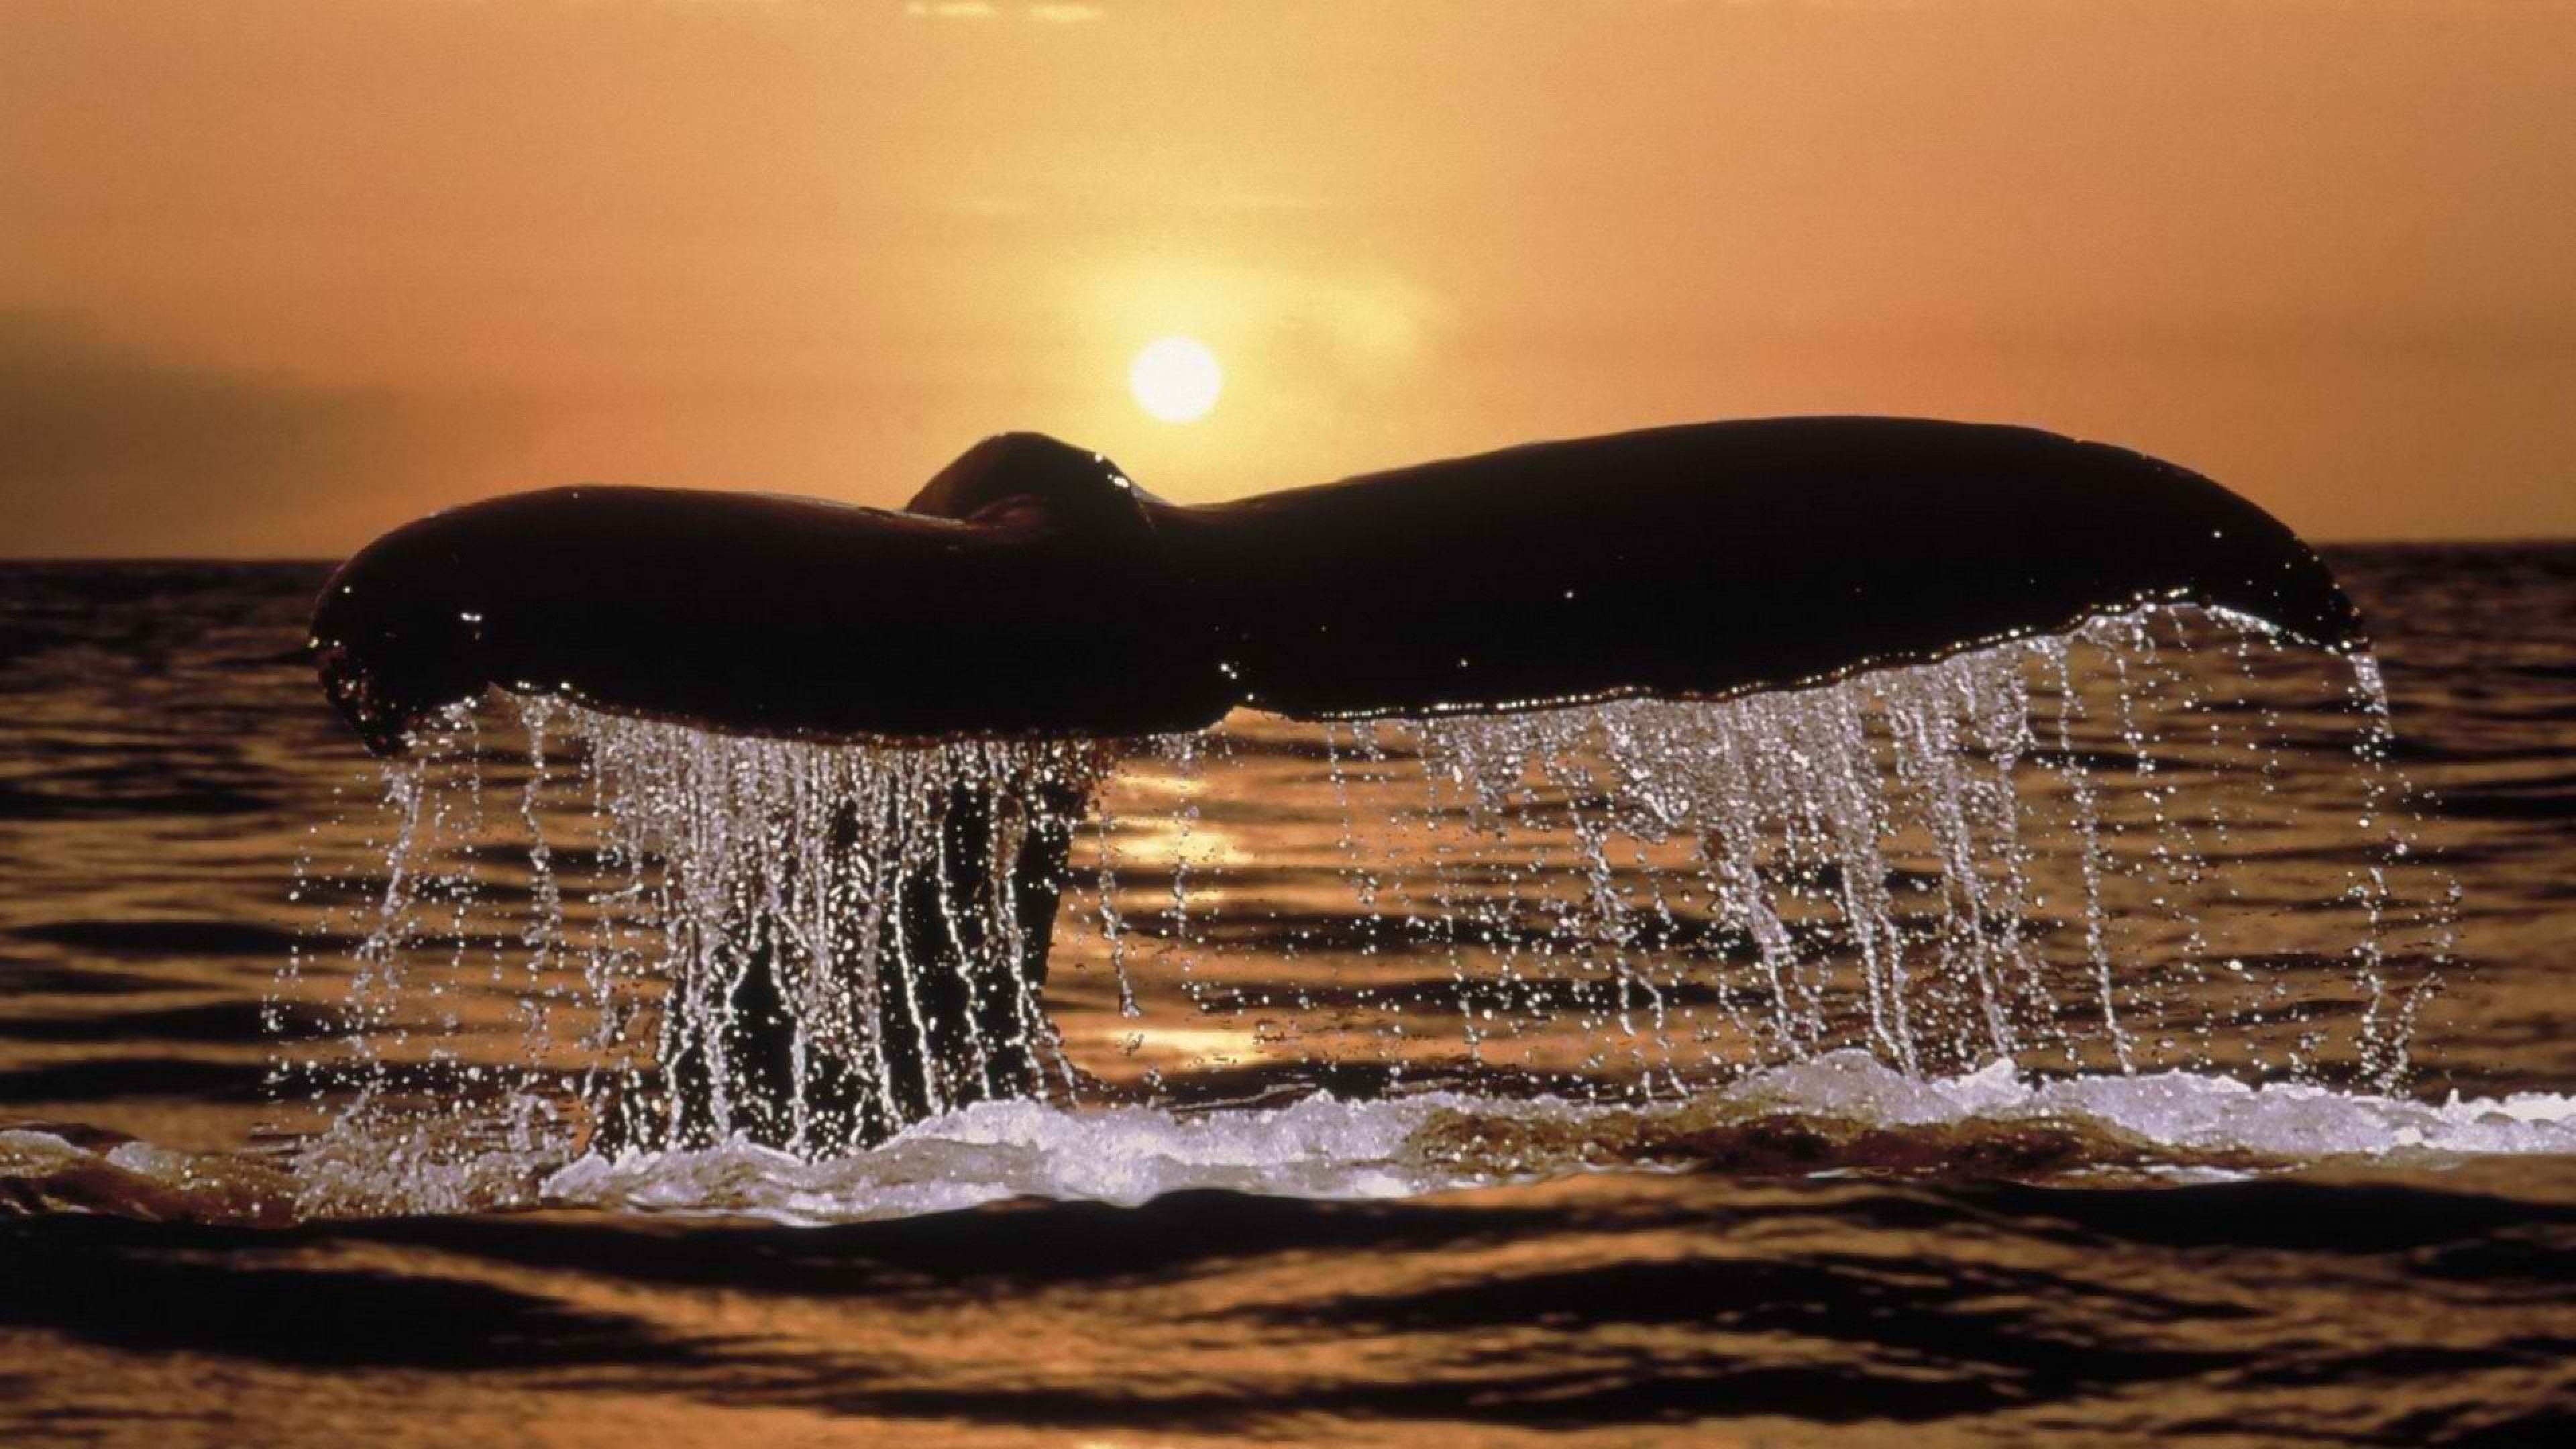 Preview Wallpaper Whale Tail Spray Sunset 3840x2160 3840x2160